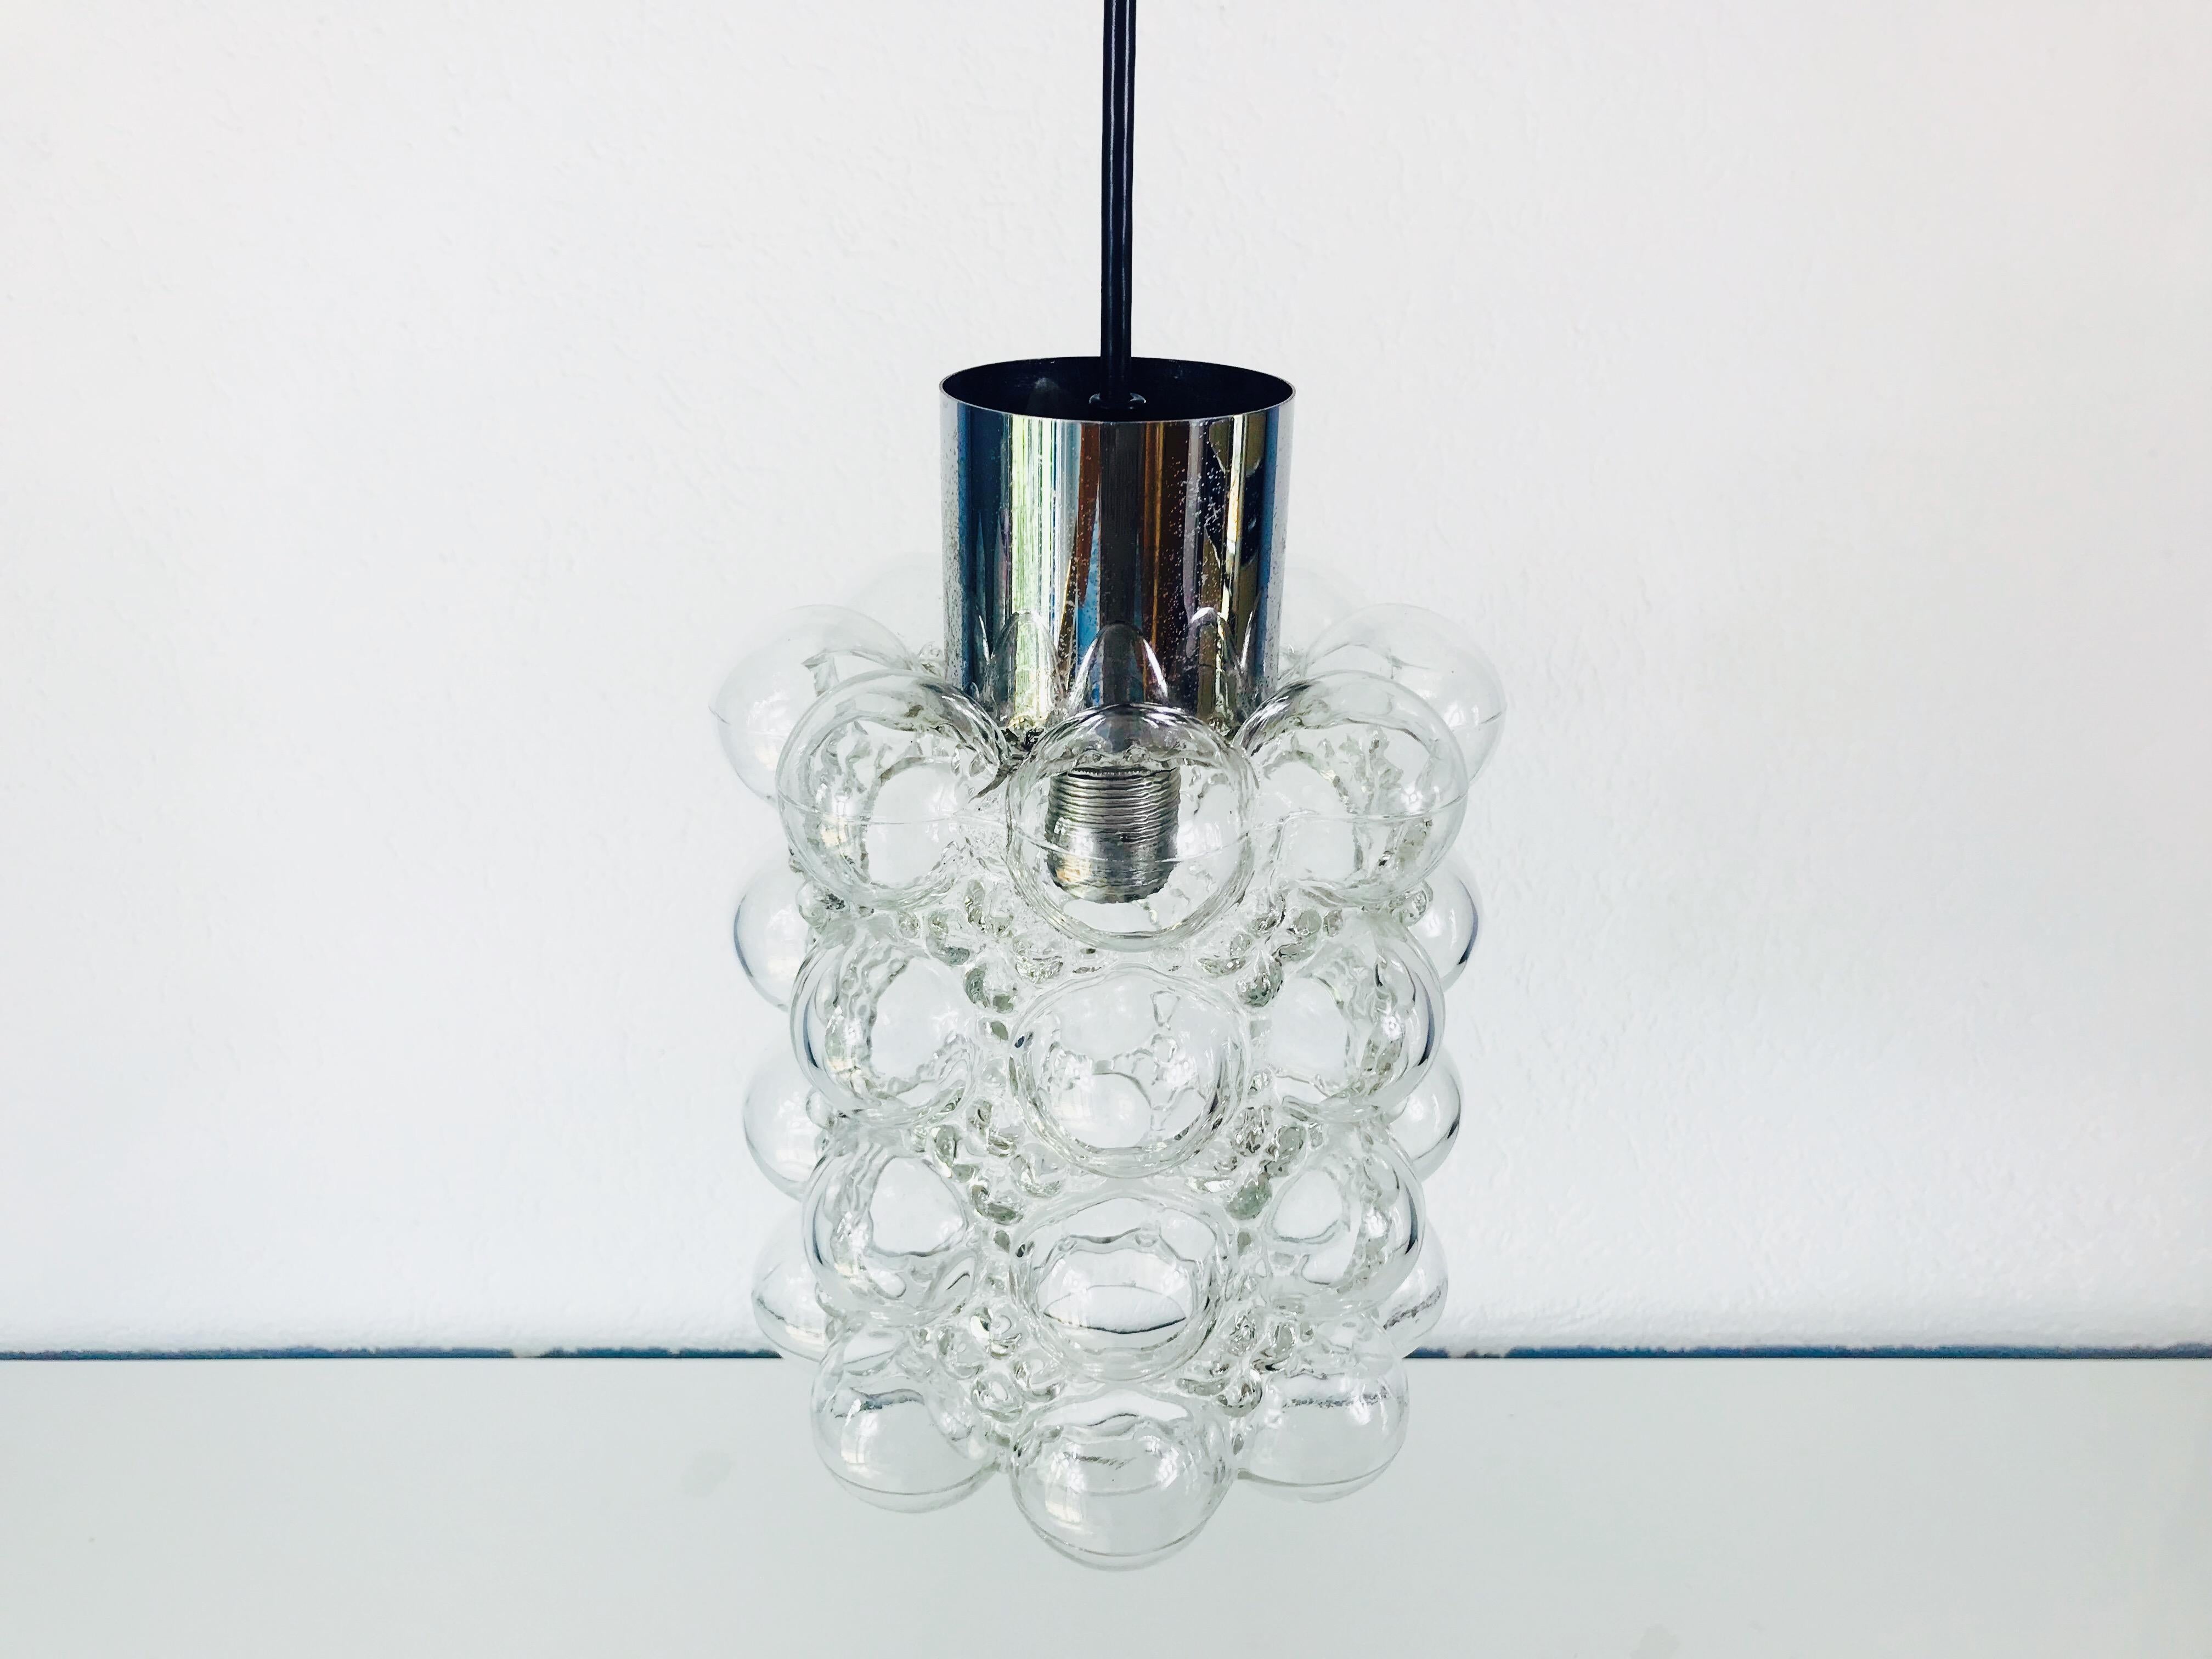 A bubble glass flush mount by Helena Tynell for Limburg made in Germany in the 1960s. Helena Tynell is a glass and ceramic designer who has worked for many European companies. One of her master works is this amber glass pendant lamp. It is